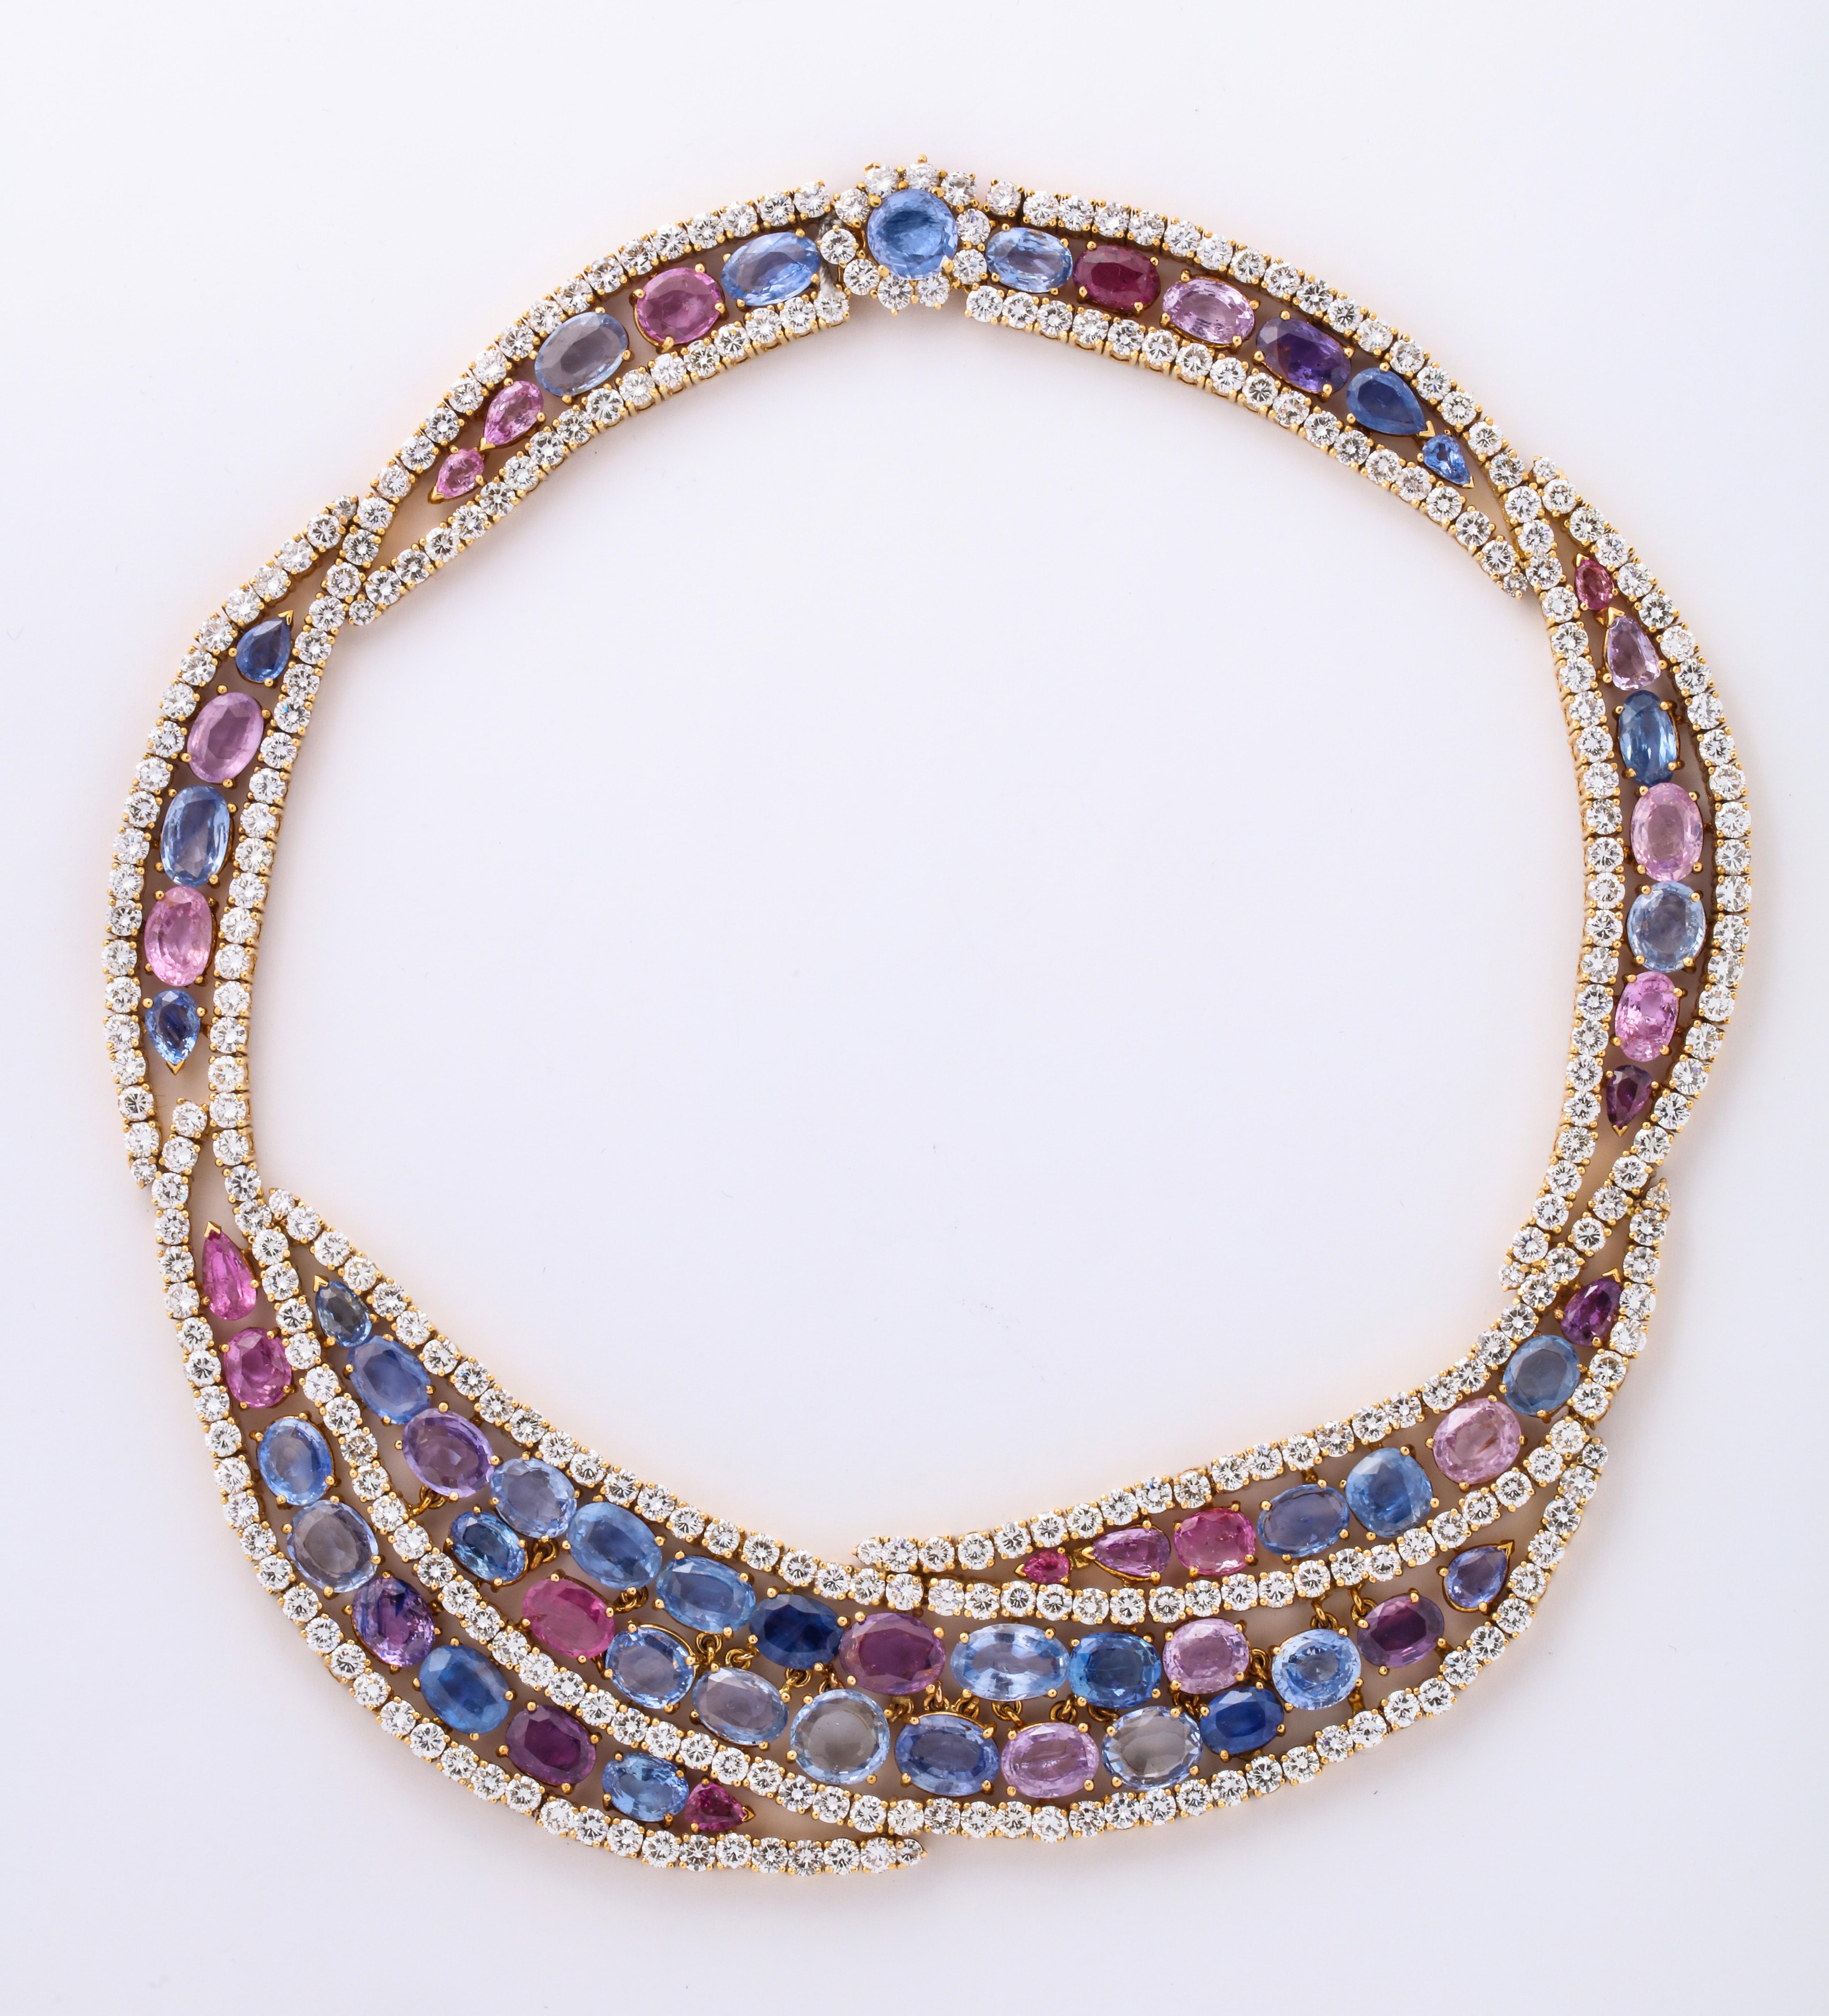 This stunning necklaces displays the vast color scheme that sapphires can be. whether its  blue or pink the sapphires shine their best surrounded by diamonds.

Approx 108.21 carats of sapphires
and approx 43.78 ct of diamonds

Depicted in full page